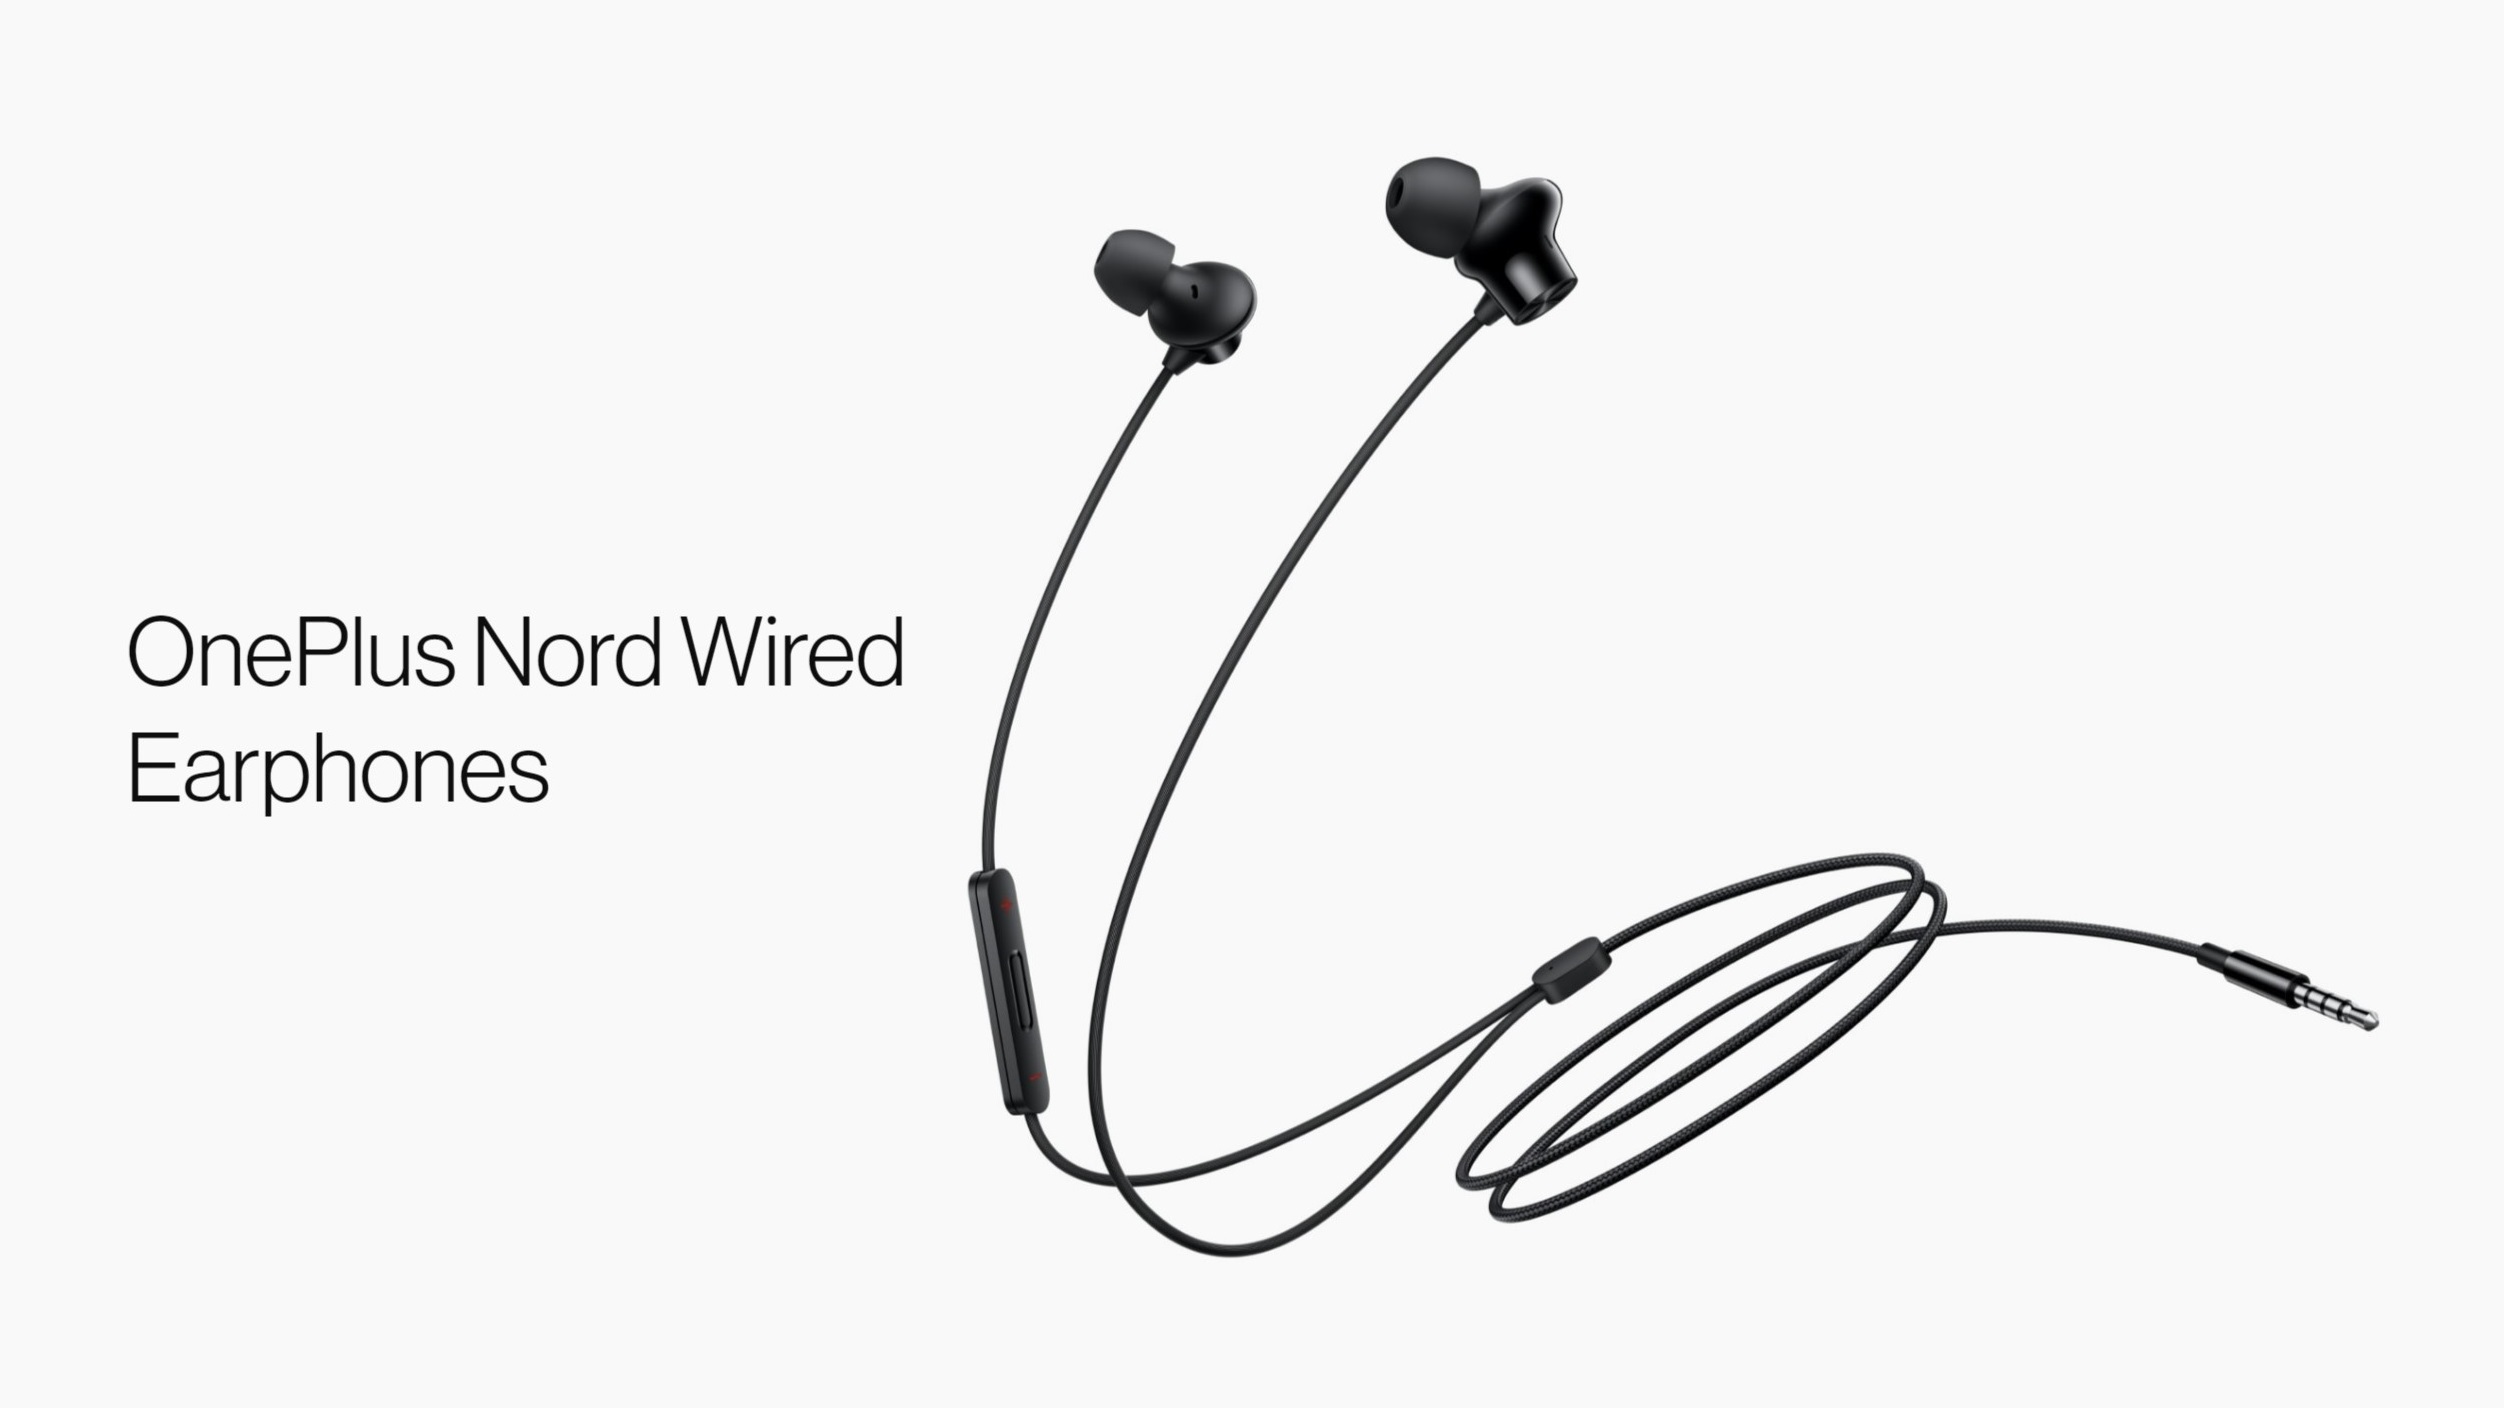 OnePlus Nord Wired Earphones launched in India